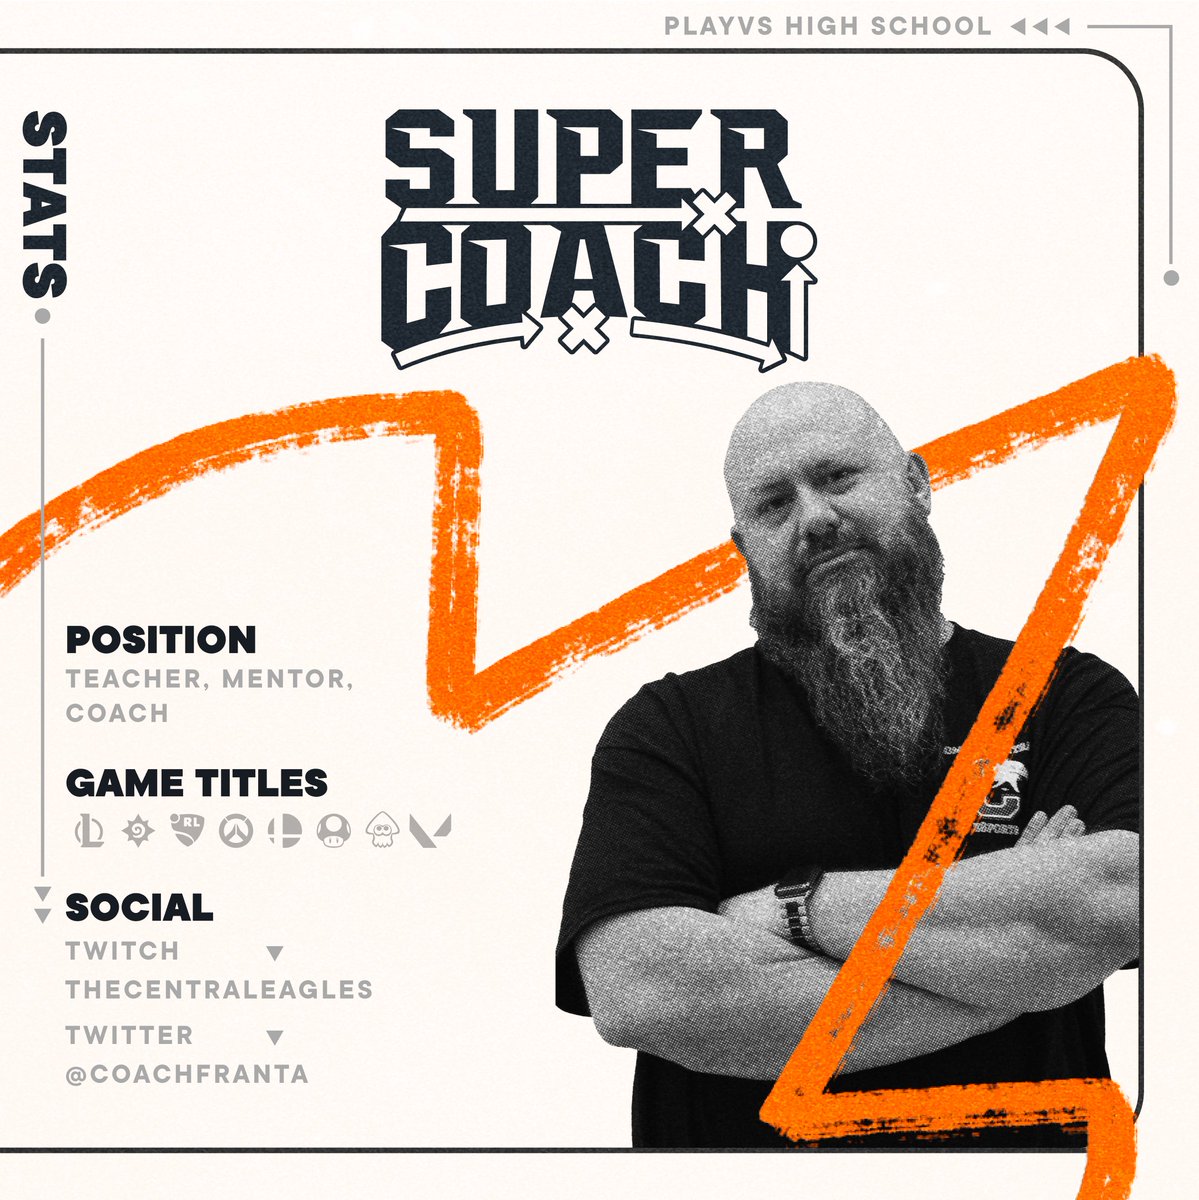 Congrats to your first year as a Super Coach @CoachFranta! Coming from Central High, Jonathan has seen students that compete in Drama, Football, Basketball, Tennis, Wrestling, and even Cheerleading join the Esports Program. 'Esports transcends barriers'